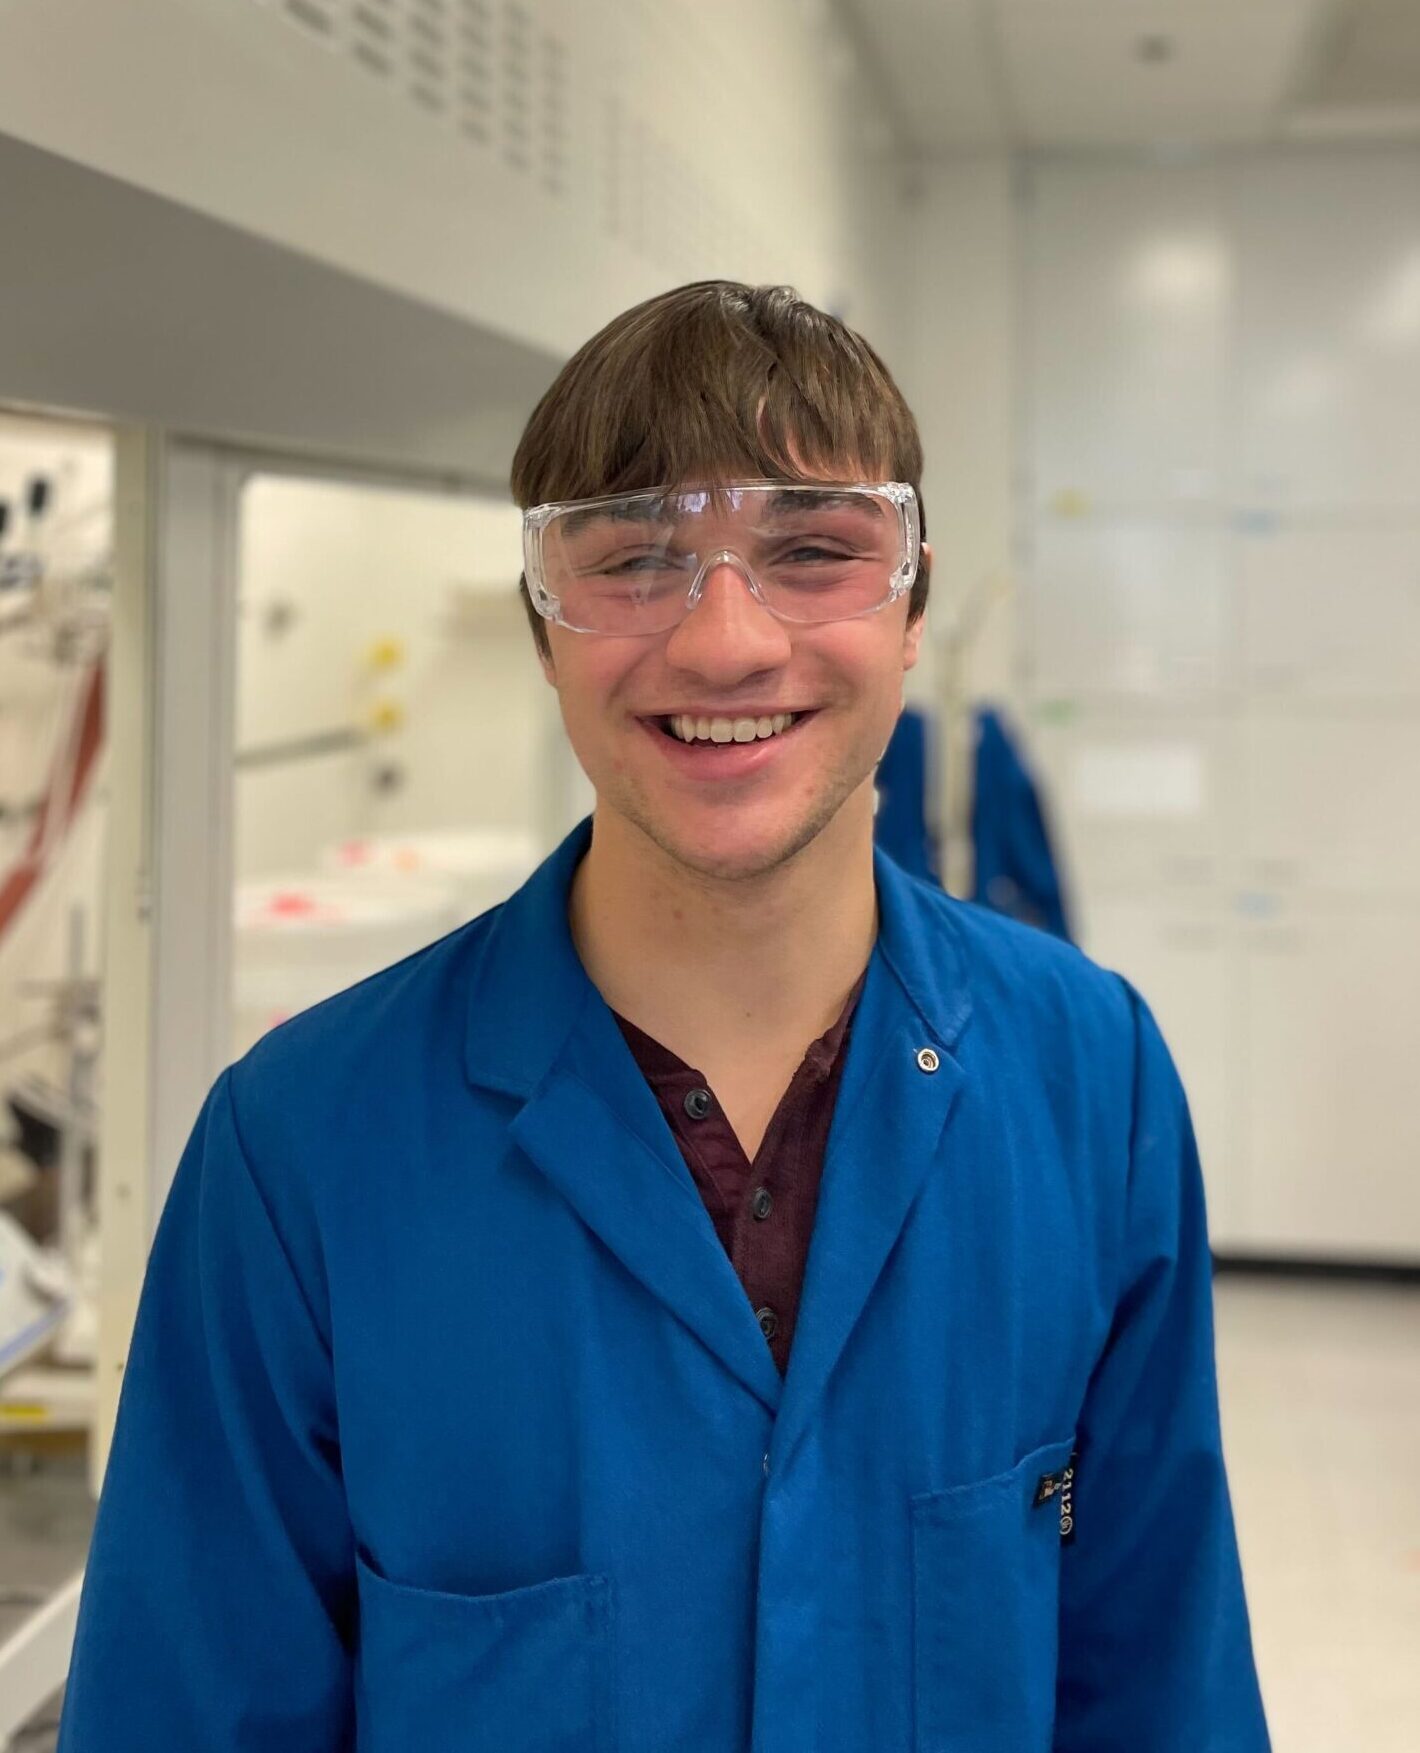 A student in his lab gear